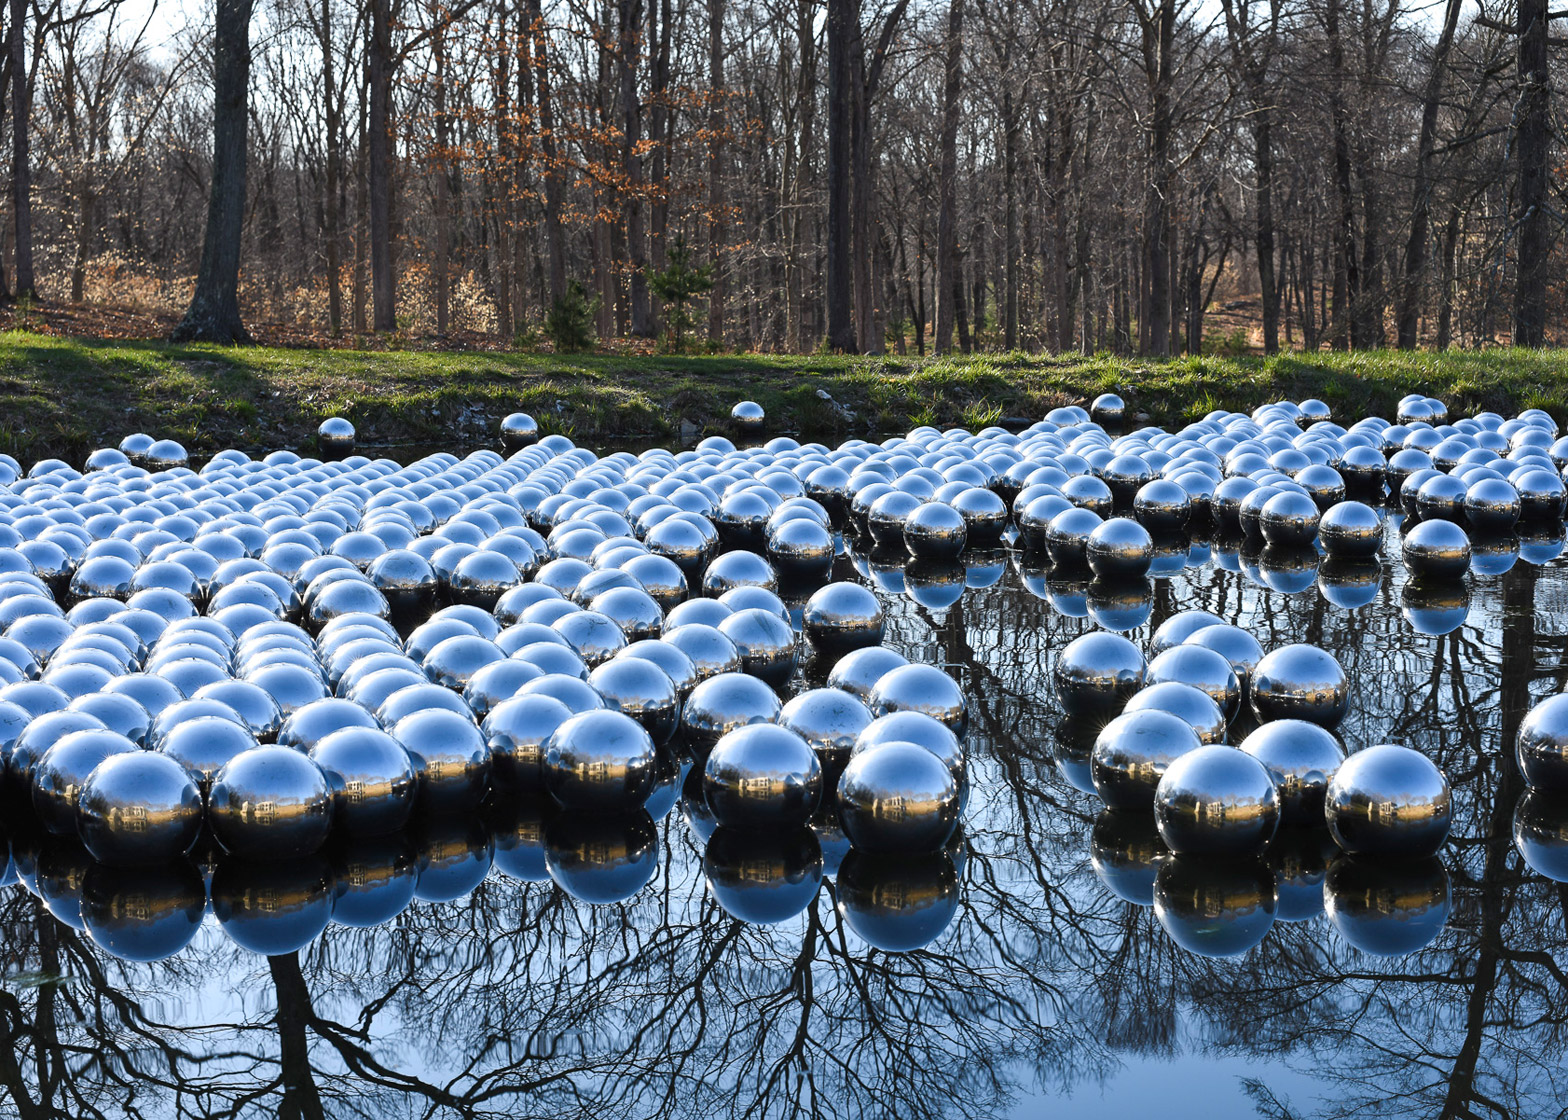 Yayoi Kusama's Narcissus Garden installation at Philip Johnson's Glass House estate in Connecticut